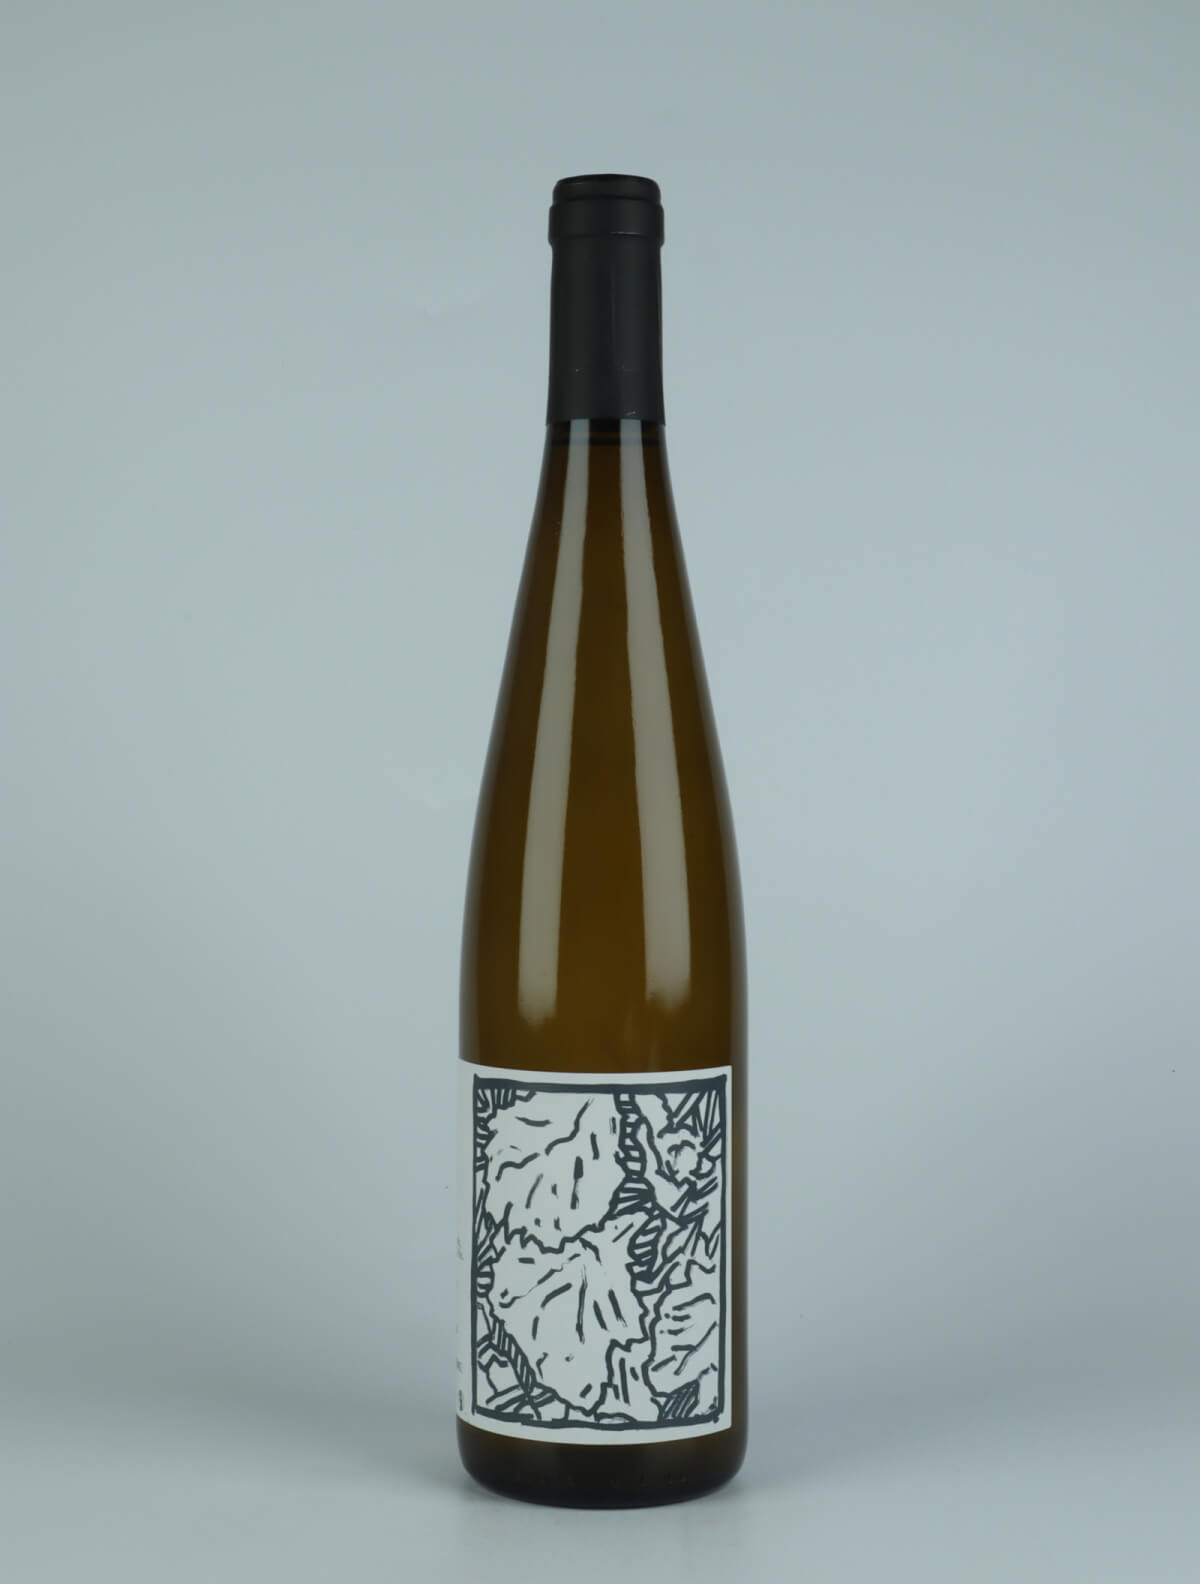 A bottle 2021 Riesling White wine from Domaine Goepp, Alsace in France